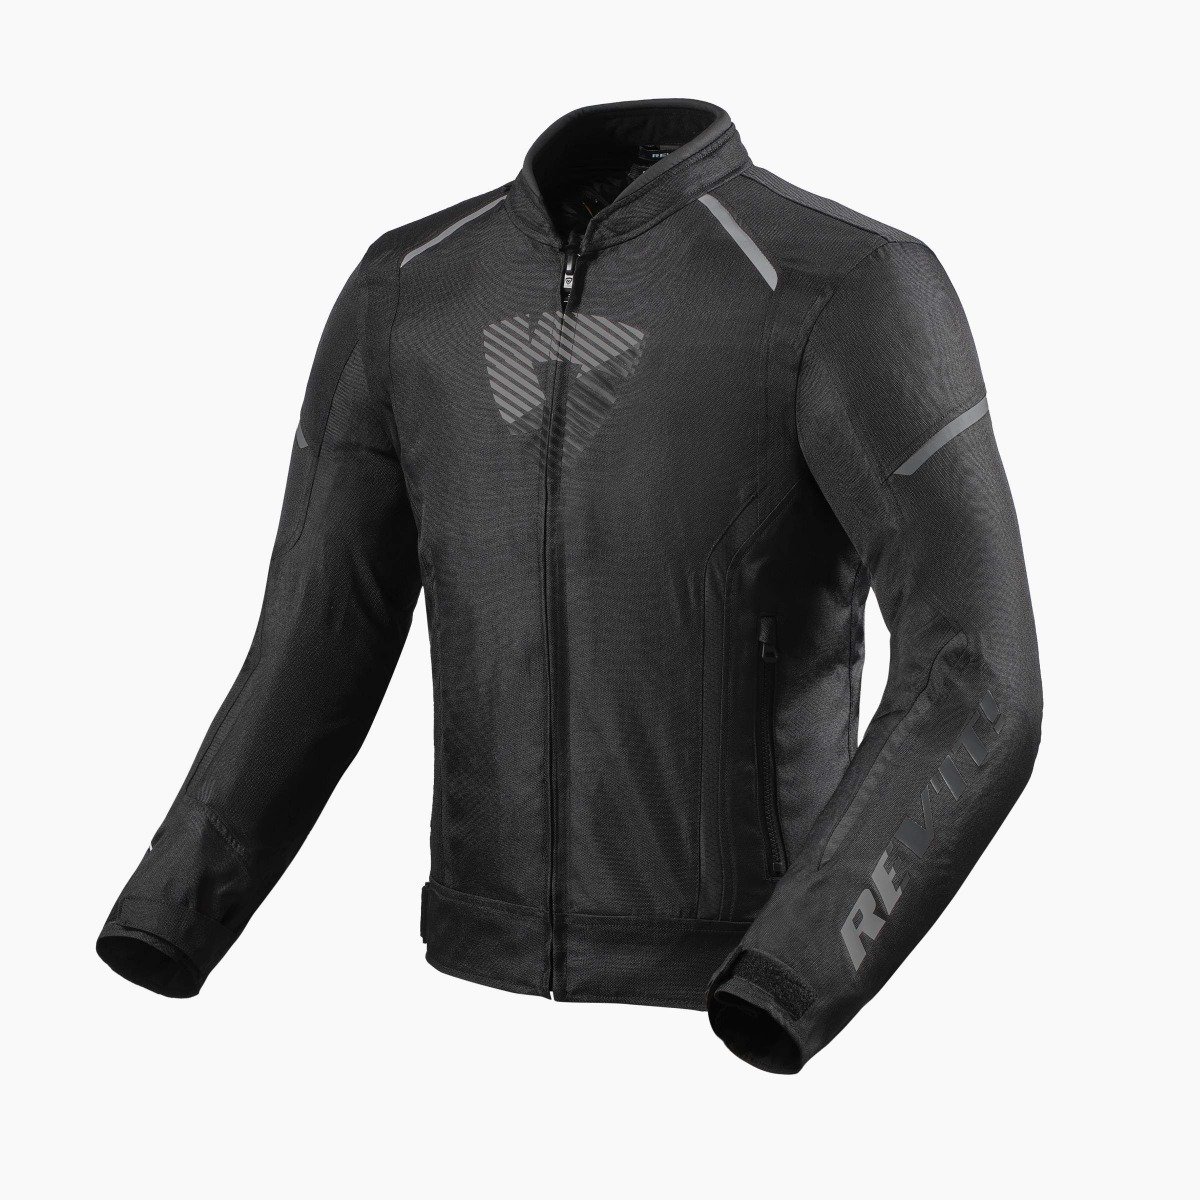 Image of REV'IT! Sprint H2O Jacket Black Anthracite Size 2XL ID 8700001311779